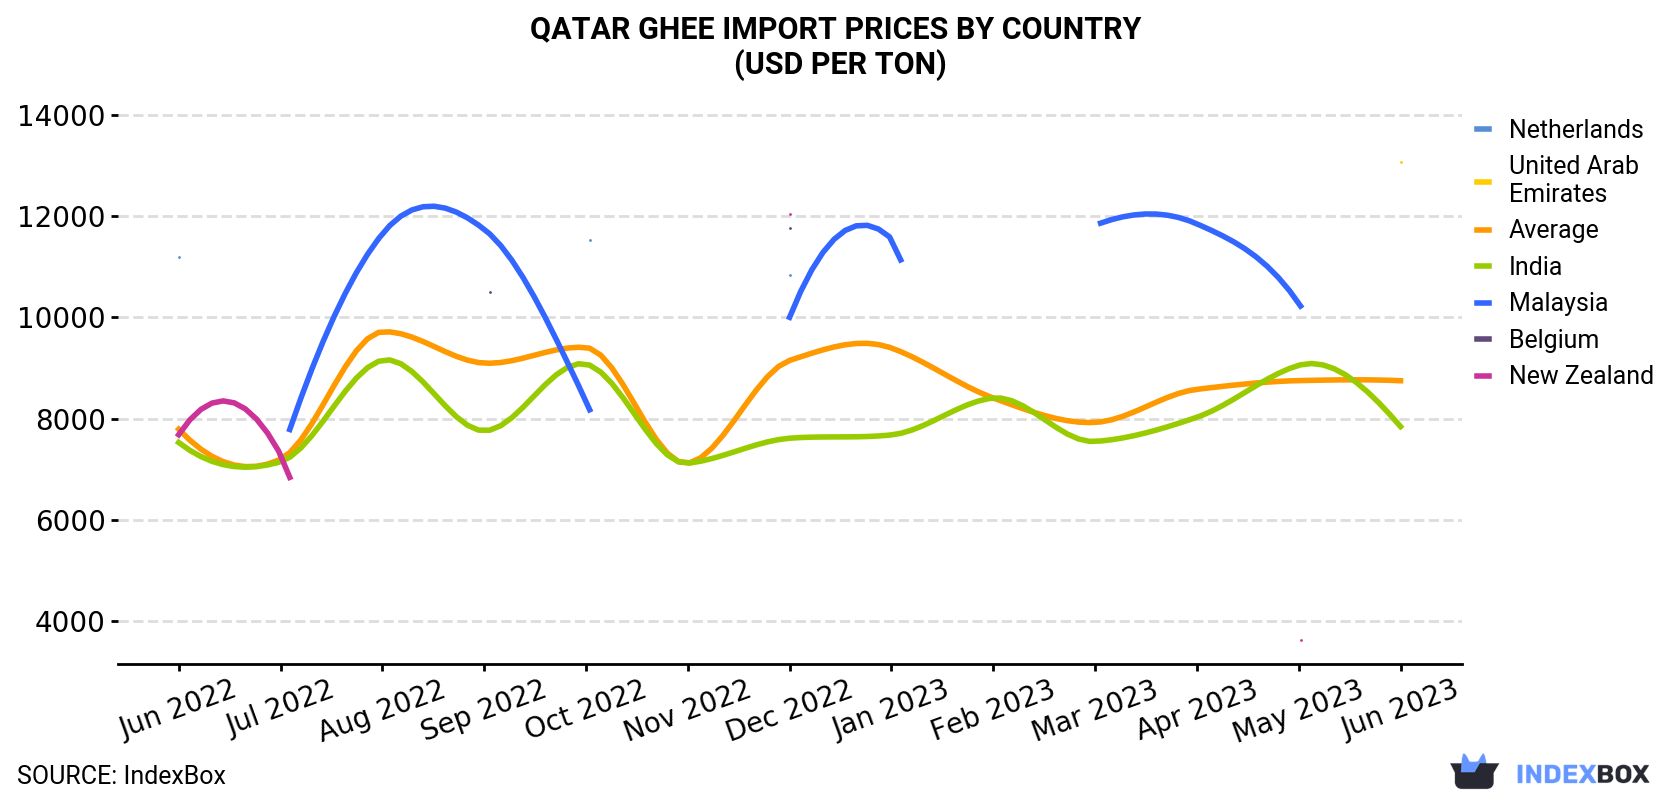 Qatar Ghee Import Prices By Country (USD Per Ton)